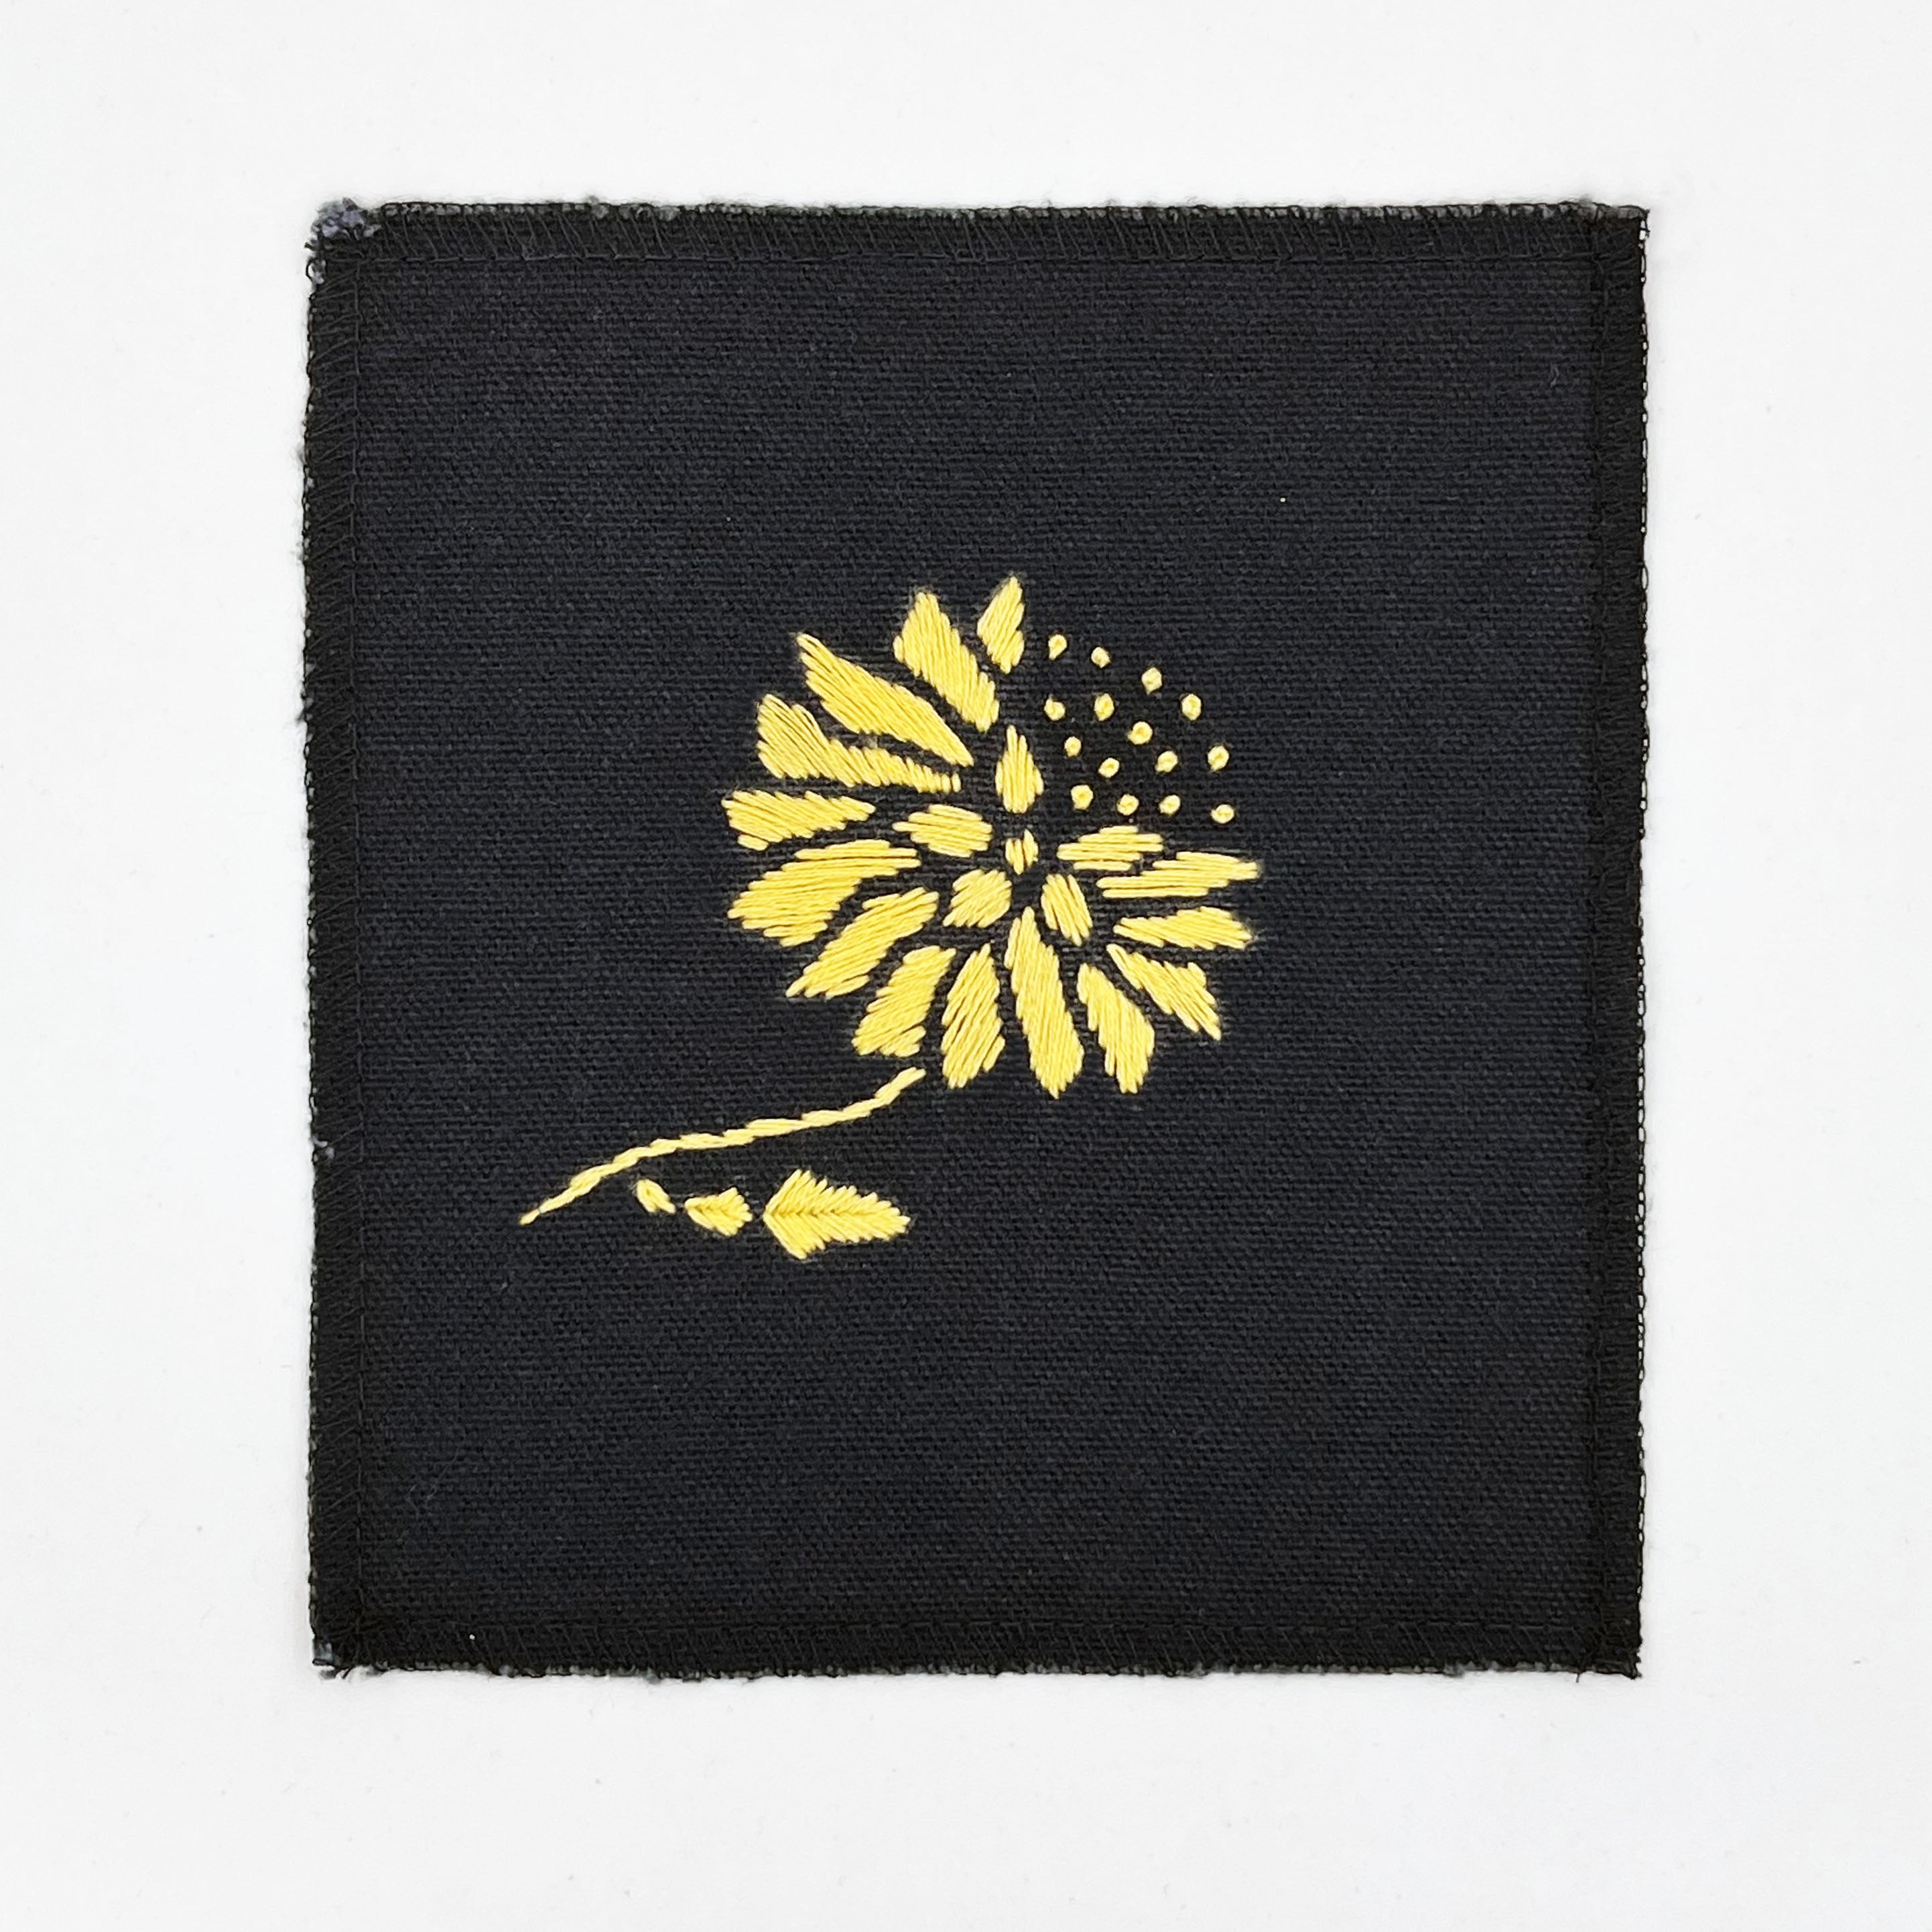 Hand Embroidered Dandelion Patch